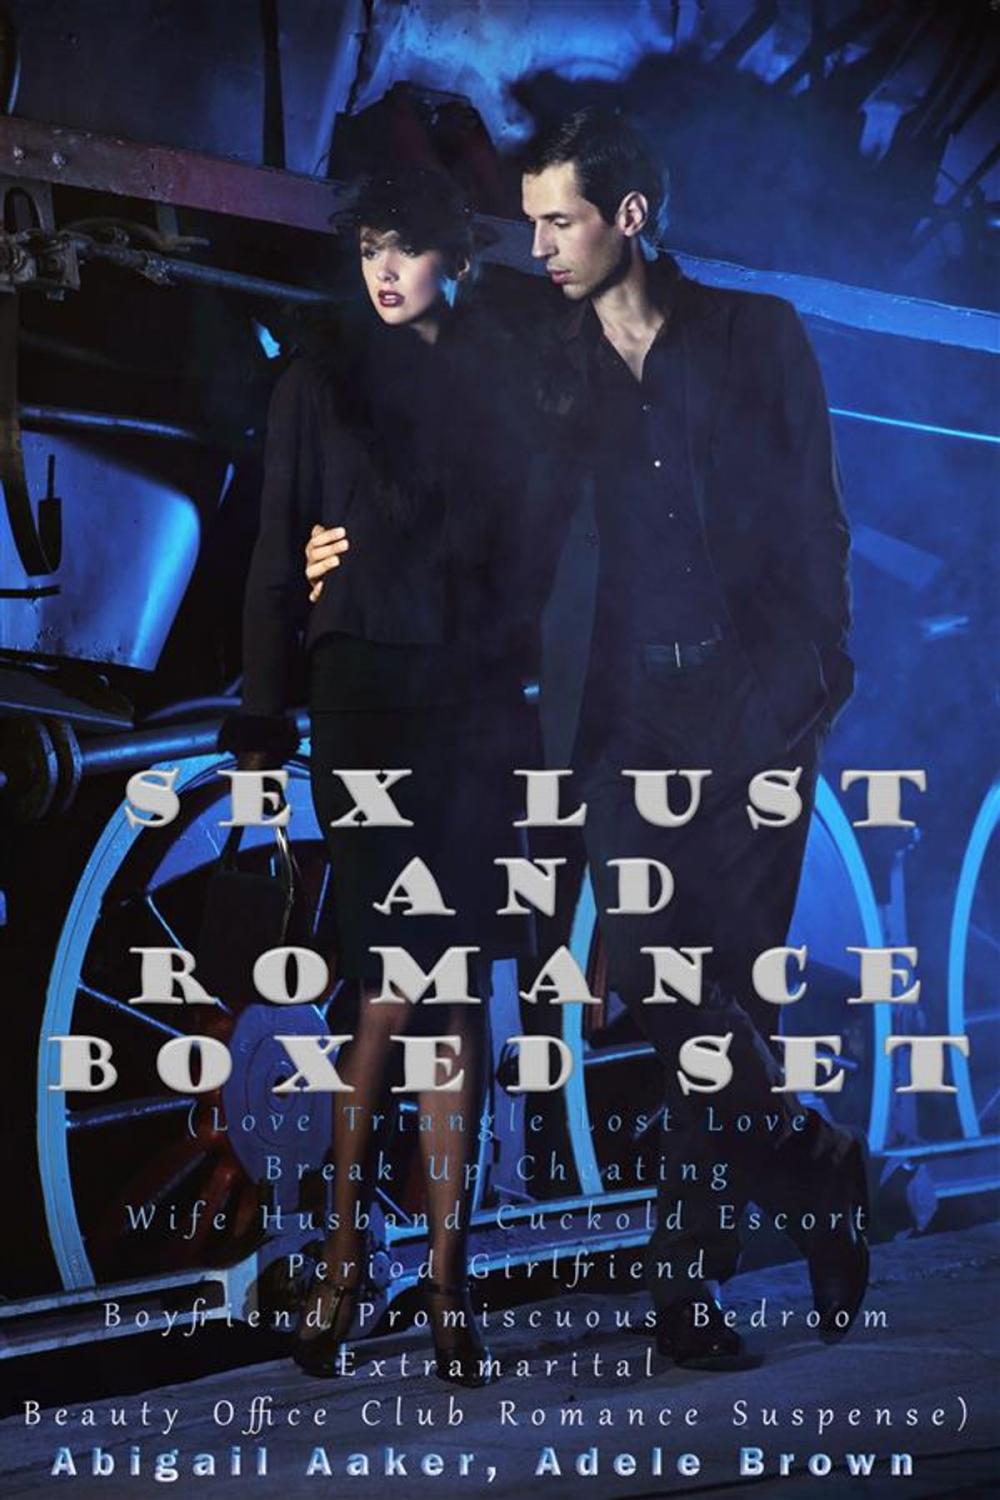 Big bigCover of Sex Lust and Romance Boxed Set (Love Triangle Lost Love Break Up Cheating Wife Husband Cuckold Escort Period Girlfriend Boyfriend Promiscuous Bedroom Extramarital Beauty Office Club Romance Suspense)